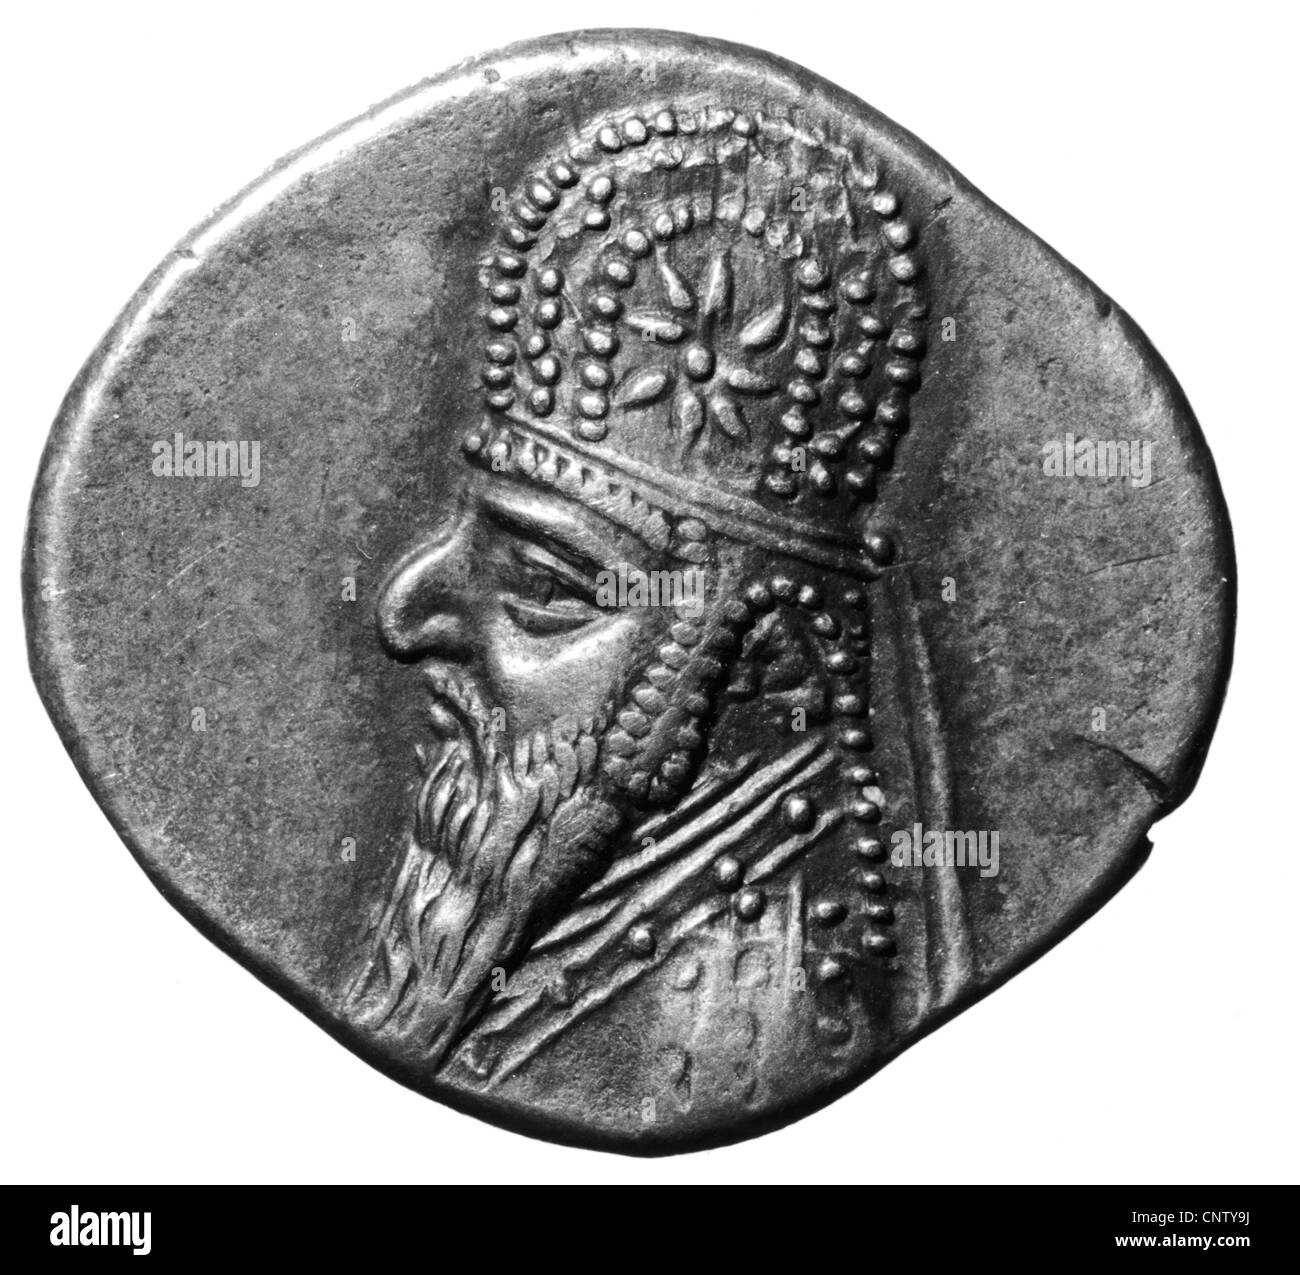 Mithridates II "the Great", King of the Parthian Empire 123 - 88 BC, portrait on a coin, drachm, Stock Photo